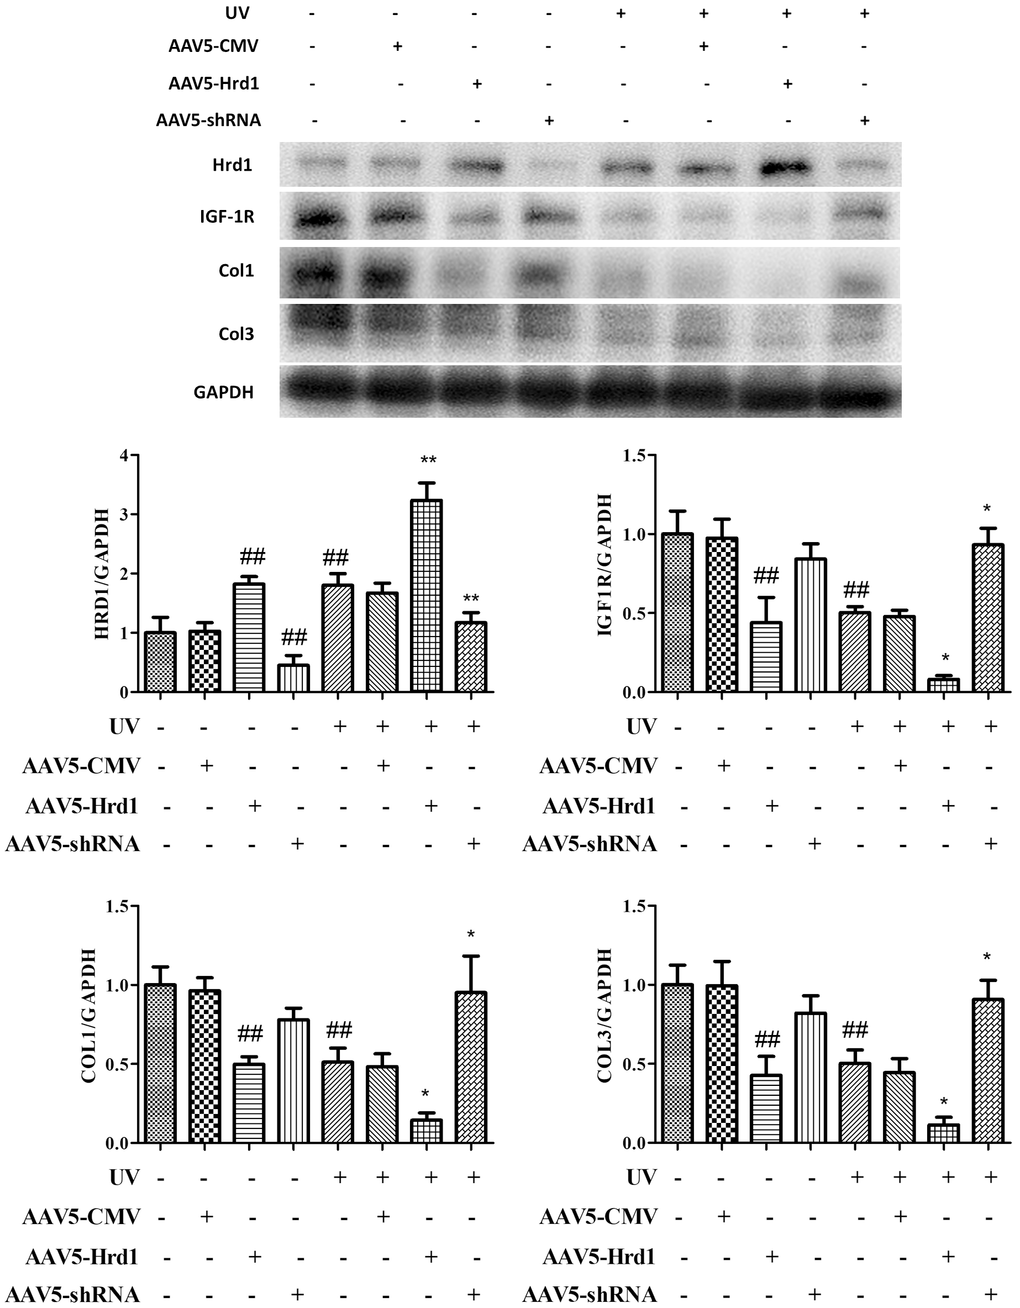 The effect of Hrd1 transfection on protein expressions of Hrd1, IGF-1R, Type I collagen and Type III collagen by western blot in mice. The results were presented as mean ± SD. ##